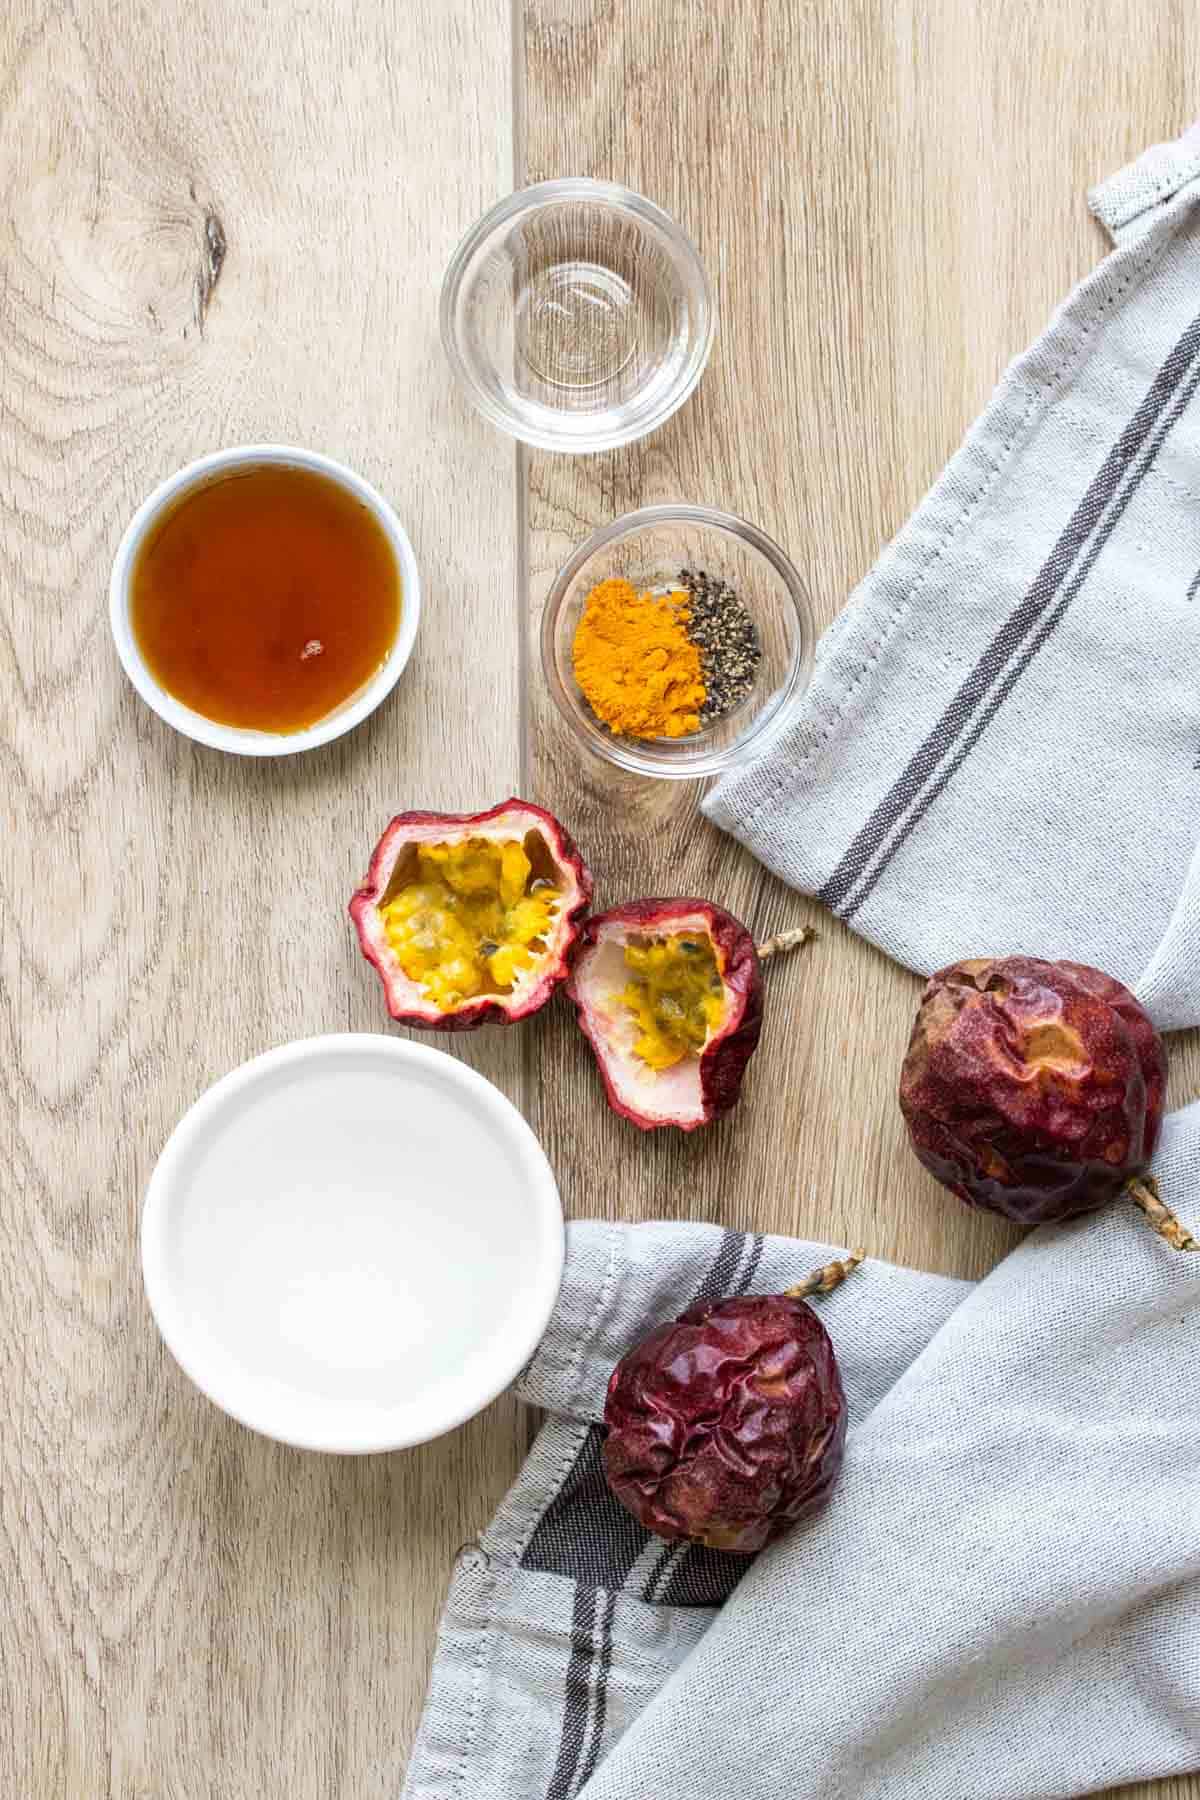 Overhead shot of cut open passion fruit, water, syrup and spices on a wooden surface